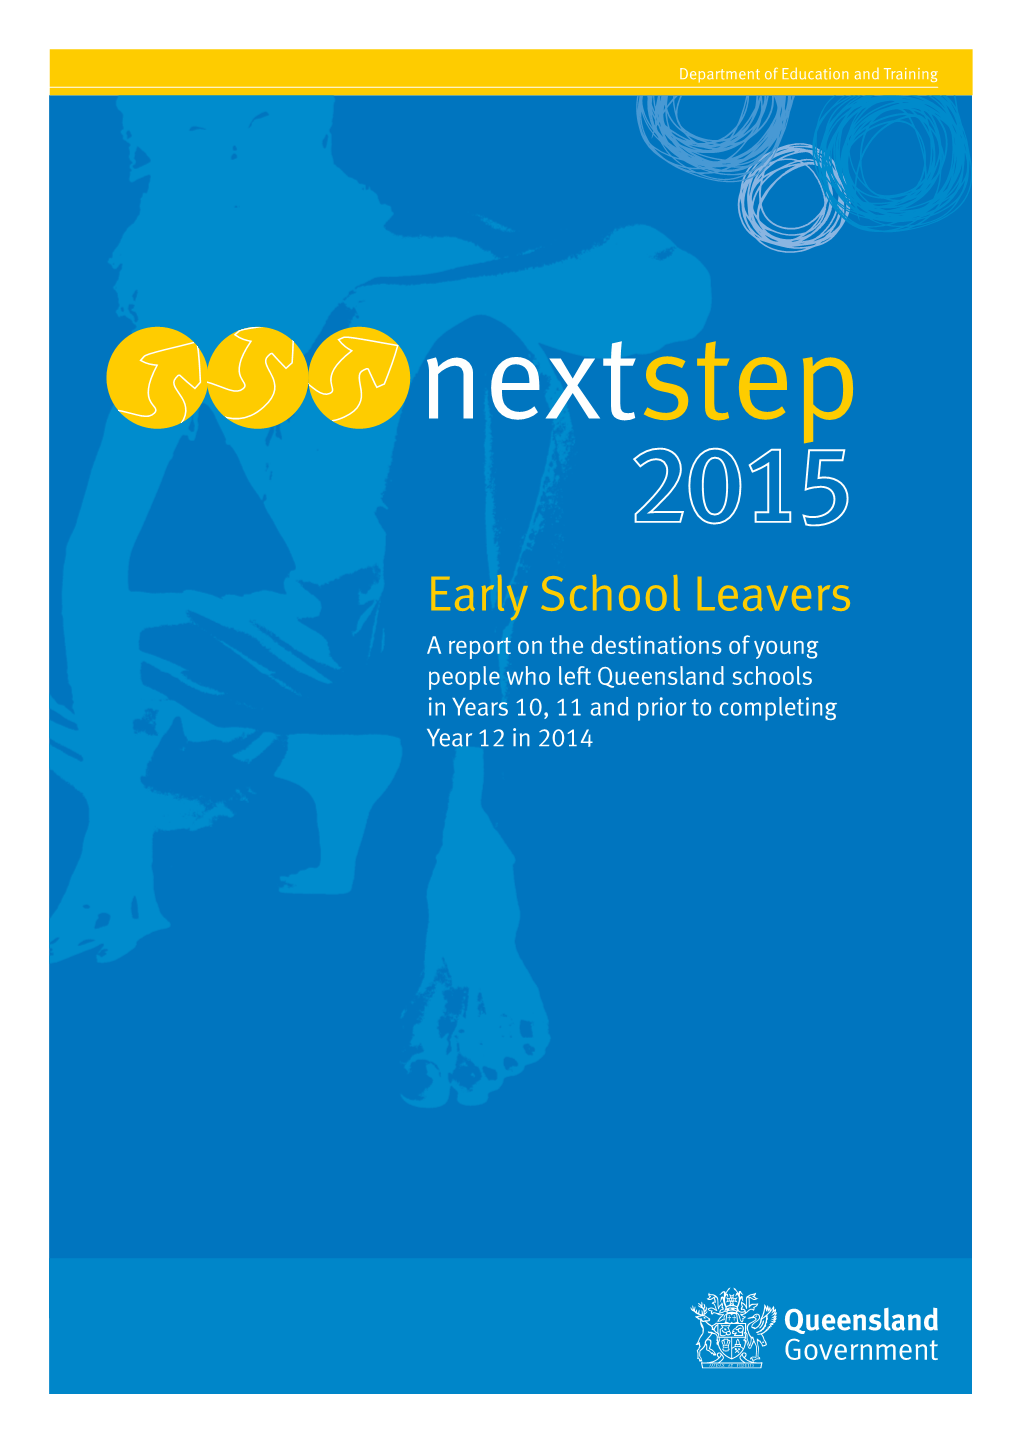 2015 Early School Leavers Report a Reference Group Advises on the Design and Documents the Results of the Annual Statewide Conduct of the Survey